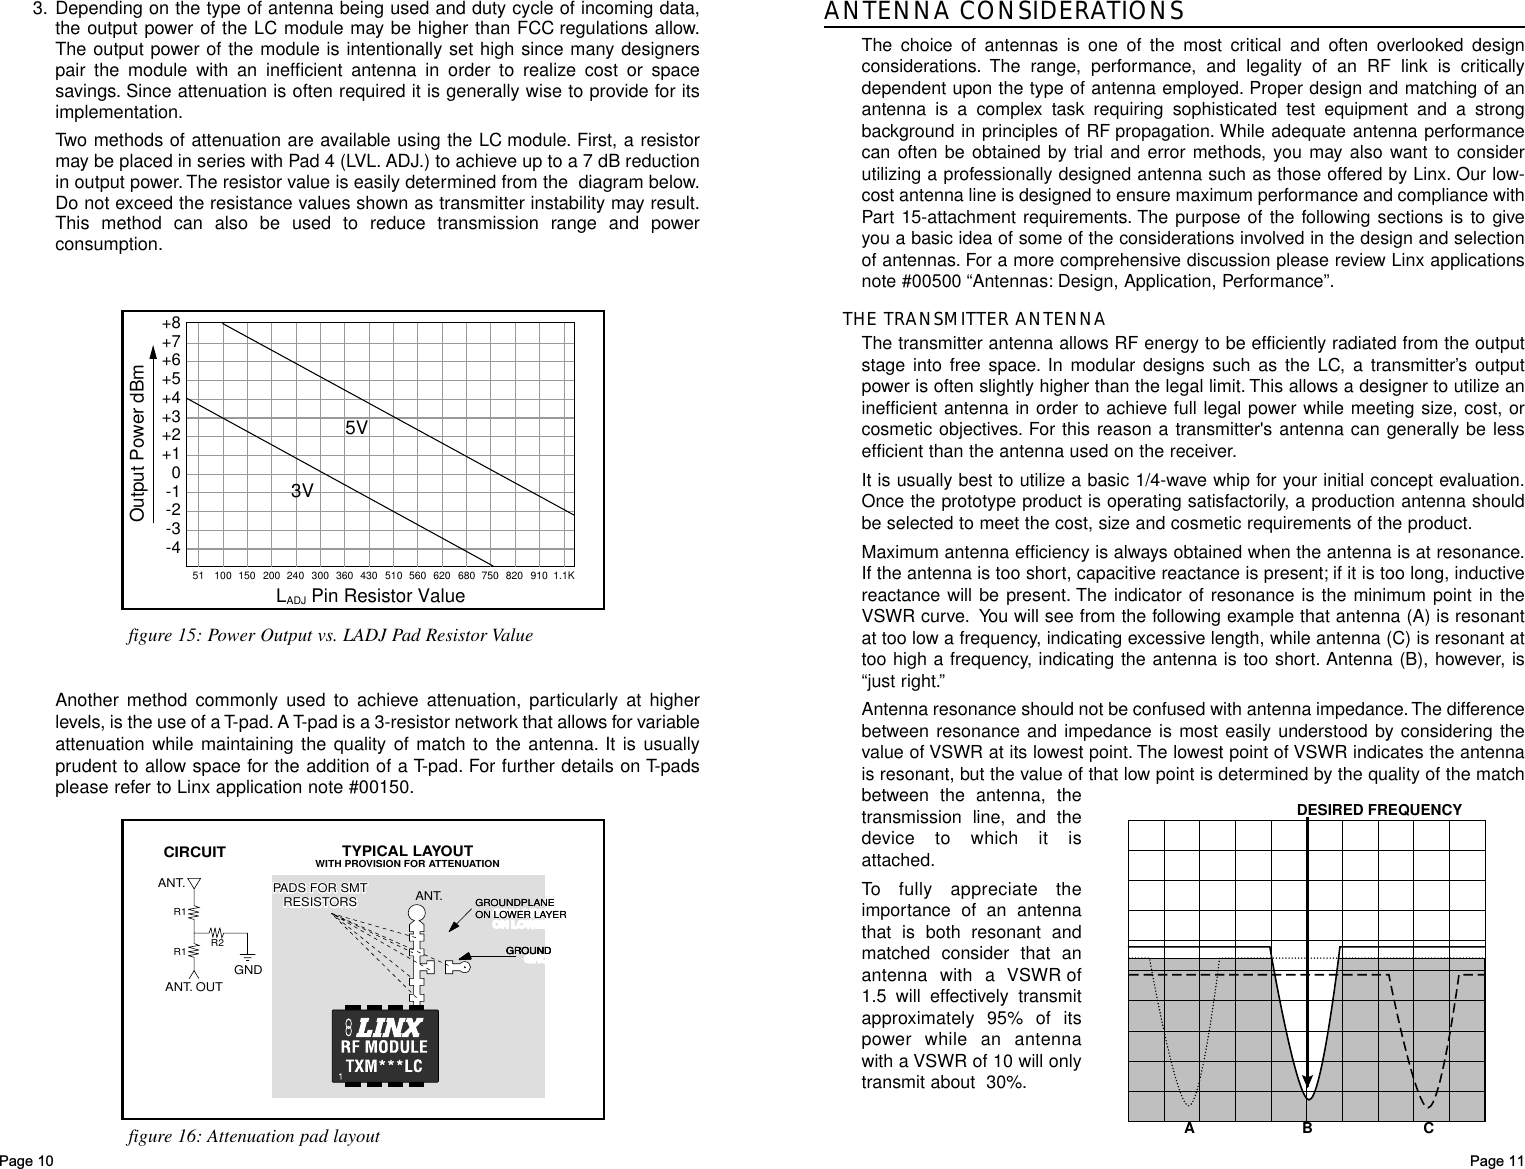 Page 11ANTENNA CONSIDERATIONSThe choice of antennas is one of the most critical and often overlooked designconsiderations. The range, performance, and legality of an RF link is criticallydependent upon the type of antenna employed. Proper design and matching of anantenna is a complex task requiring sophisticated test equipment and a strongbackground in principles of RF propagation. While adequate antenna performancecan often be obtained by trial and error methods, you may also want to considerutilizing a professionally designed antenna such as those offered by Linx. Our low-cost antenna line is designed to ensure maximum performance and compliance withPart 15-attachment requirements. The purpose of the following sections is to giveyou a basic idea of some of the considerations involved in the design and selectionof antennas. For a more comprehensive discussion please review Linx applicationsnote #00500 “Antennas: Design, Application, Performance”.THE TRANSMITTER ANTENNAThe transmitter antenna allows RF energy to be efficiently radiated from the outputstage into free space. In modular designs such as the LC, a transmitter’s outputpower is often slightly higher than the legal limit. This allows a designer to utilize aninefficient antenna in order to achieve full legal power while meeting size, cost, orcosmetic objectives. For this reason a transmitter&apos;s antenna can generally be lessefficient than the antenna used on the receiver.It is usually best to utilize a basic 1/4-wave whip for your initial concept evaluation.Once the prototype product is operating satisfactorily, a production antenna shouldbe selected to meet the cost, size and cosmetic requirements of the product.Maximum antenna efficiency is always obtained when the antenna is at resonance.If the antenna is too short, capacitive reactance is present; if it is too long, inductivereactance will be present. The indicator of resonance is the minimum point in theVSWR curve. You will see from the following example that antenna (A) is resonantat too low a frequency, indicating excessive length, while antenna (C) is resonant attoo high a frequency, indicating the antenna is too short. Antenna (B), however, is“just right.”Antenna resonance should not be confused with antenna impedance.The differencebetween resonance and impedance is most easily understood by considering thevalue of VSWR at its lowest point. The lowest point of VSWR indicates the antennais resonant, but the value of that low point is determined by the quality of the matchbetween the antenna, thetransmission line, and thedevice to which it isattached.To fully appreciate theimportance of an antennathat is both resonant andmatched consider that anantenna with a VSWR of1.5 will effectively transmitapproximately 95% of itspower while an antennawith a VSWR of 10 will onlytransmit about  30%.AB CDESIRED FREQUENCYPage 103. Depending on the type of antenna being used and duty cycle of incoming data,the output power of the LC module may be higher than FCC regulations allow.The output power of the module is intentionally set high since many designerspair the module with an inefficient antenna in order to realize cost or spacesavings. Since attenuation is often required it is generally wise to provide for itsimplementation.Two methods of attenuation are available using the LC module. First, a resistormay be placed in series with Pad 4 (LVL. ADJ.) to achieve up to a 7 dB reductionin output power. The resistor value is easily determined from the  diagram below.Do not exceed the resistance values shown as transmitter instability may result.This method can also be used to reduce transmission range and powerconsumption.CIRCUIT TYPICAL LAYOUTWITH PROVISION FOR ATTENUATIONGNDANT. OUTPADS FOR SMTRESISTORSPADS FOR SMTRESISTORS ANT.ANT.R1R1 R2GRGROUNDPLANEOUNDPLANEON LOON LOWER LAWER LAYERYERGROUNDPLANEON LOWER LAYERGRGROUND OUND GROUNDGRGROUND OUND GROUNDfigure 16: Attenuation pad layout+8+7+6+5+4+3+2+10-1-2-3-4LADJ Pin Resistor Value51 100 150 200 240 300 360 430 510 560 620 680 750 820 910 1.1KOutput Power dBm3V5Vfigure 15: Power Output vs. LADJ Pad Resistor ValueAnother method commonly used to achieve attenuation, particularly at higherlevels, is the use of a T-pad. A T-pad is a 3-resistor network that allows for variableattenuation while maintaining the quality of match to the antenna. It is usuallyprudent to allow space for the addition of a T-pad. For further details on T-padsplease refer to Linx application note #00150.